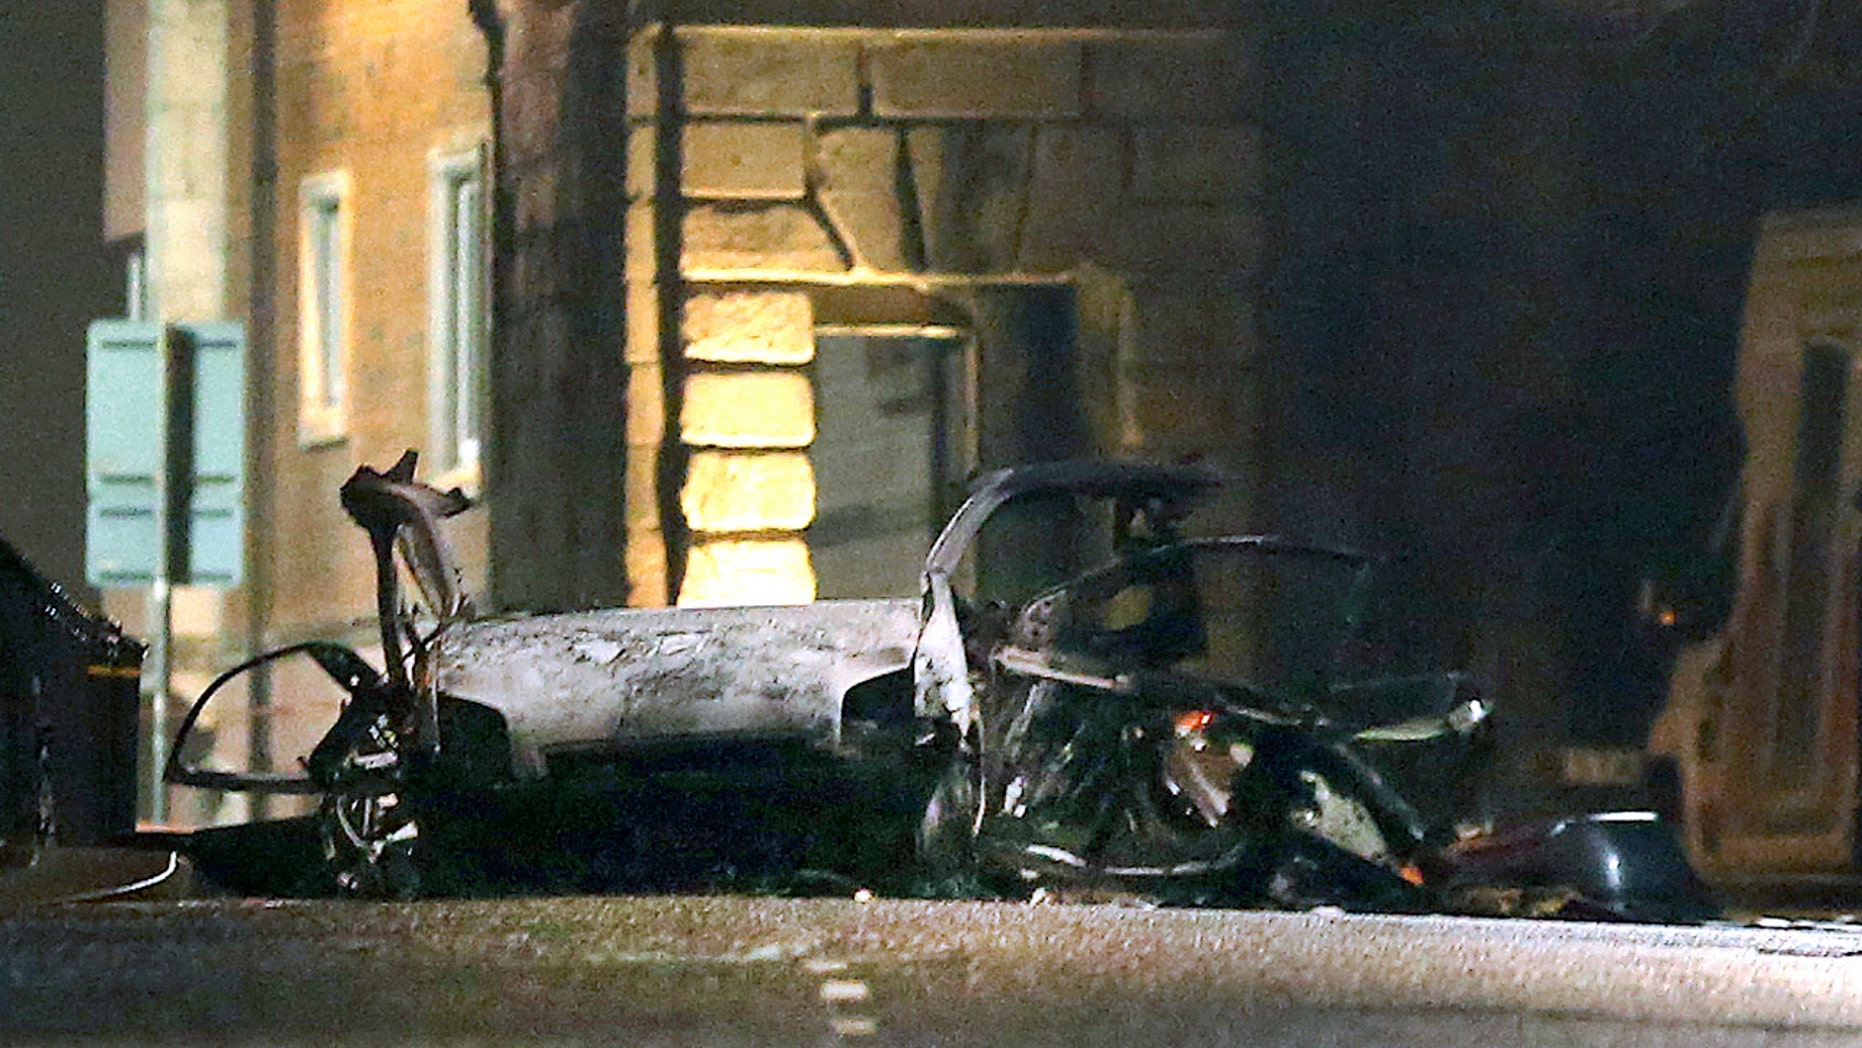 Northern Ireland car bomb attack called 